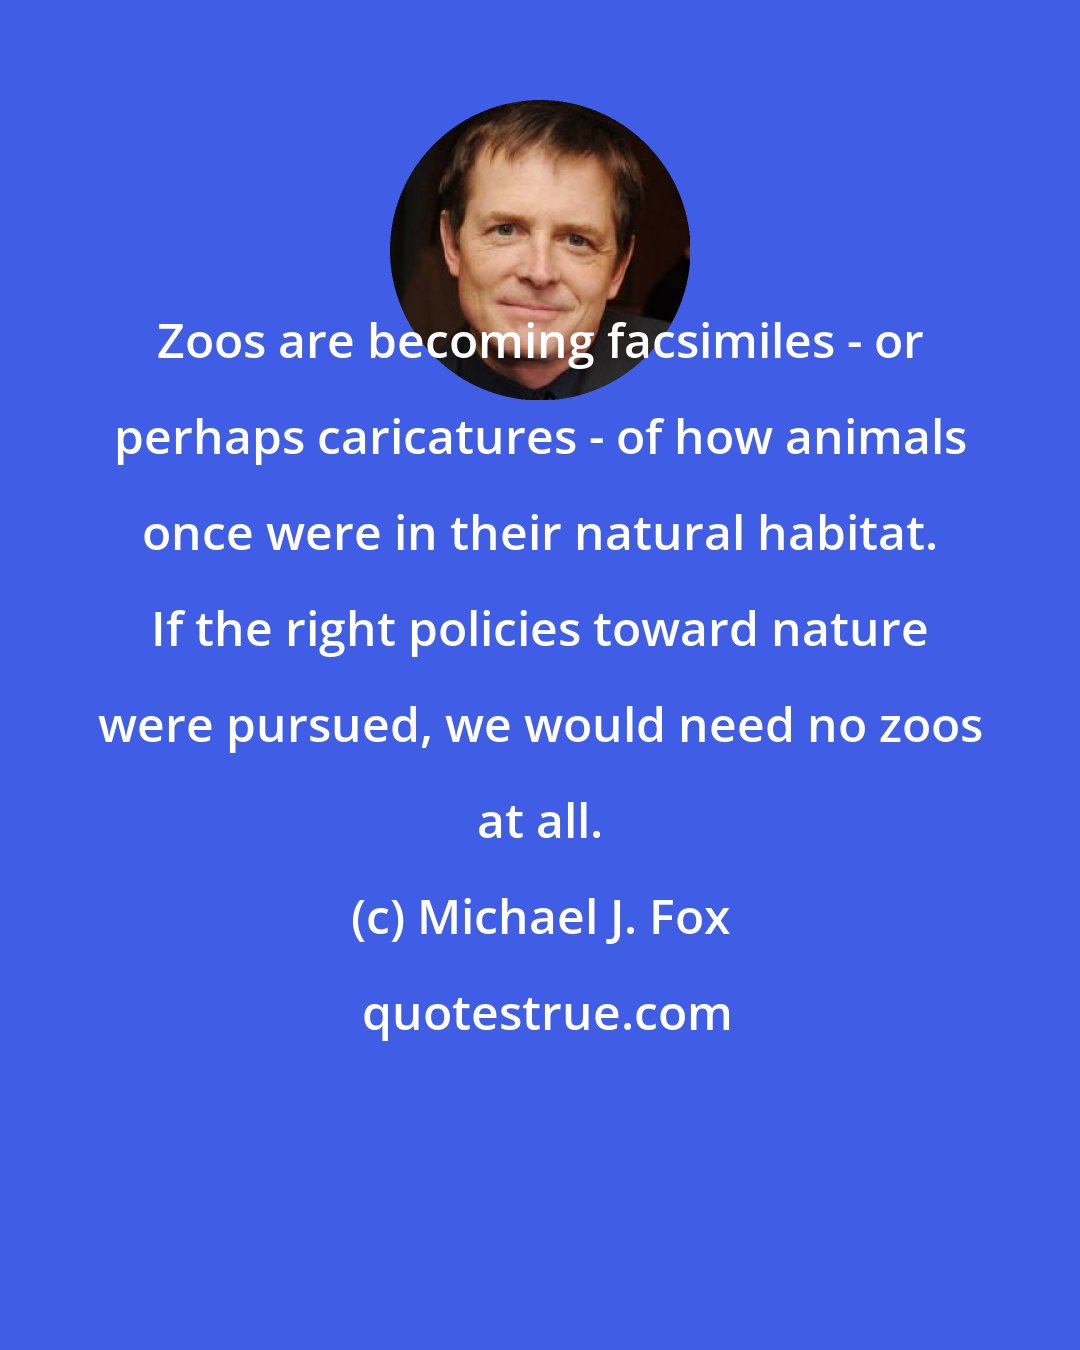 Michael J. Fox: Zoos are becoming facsimiles - or perhaps caricatures - of how animals once were in their natural habitat. If the right policies toward nature were pursued, we would need no zoos at all.